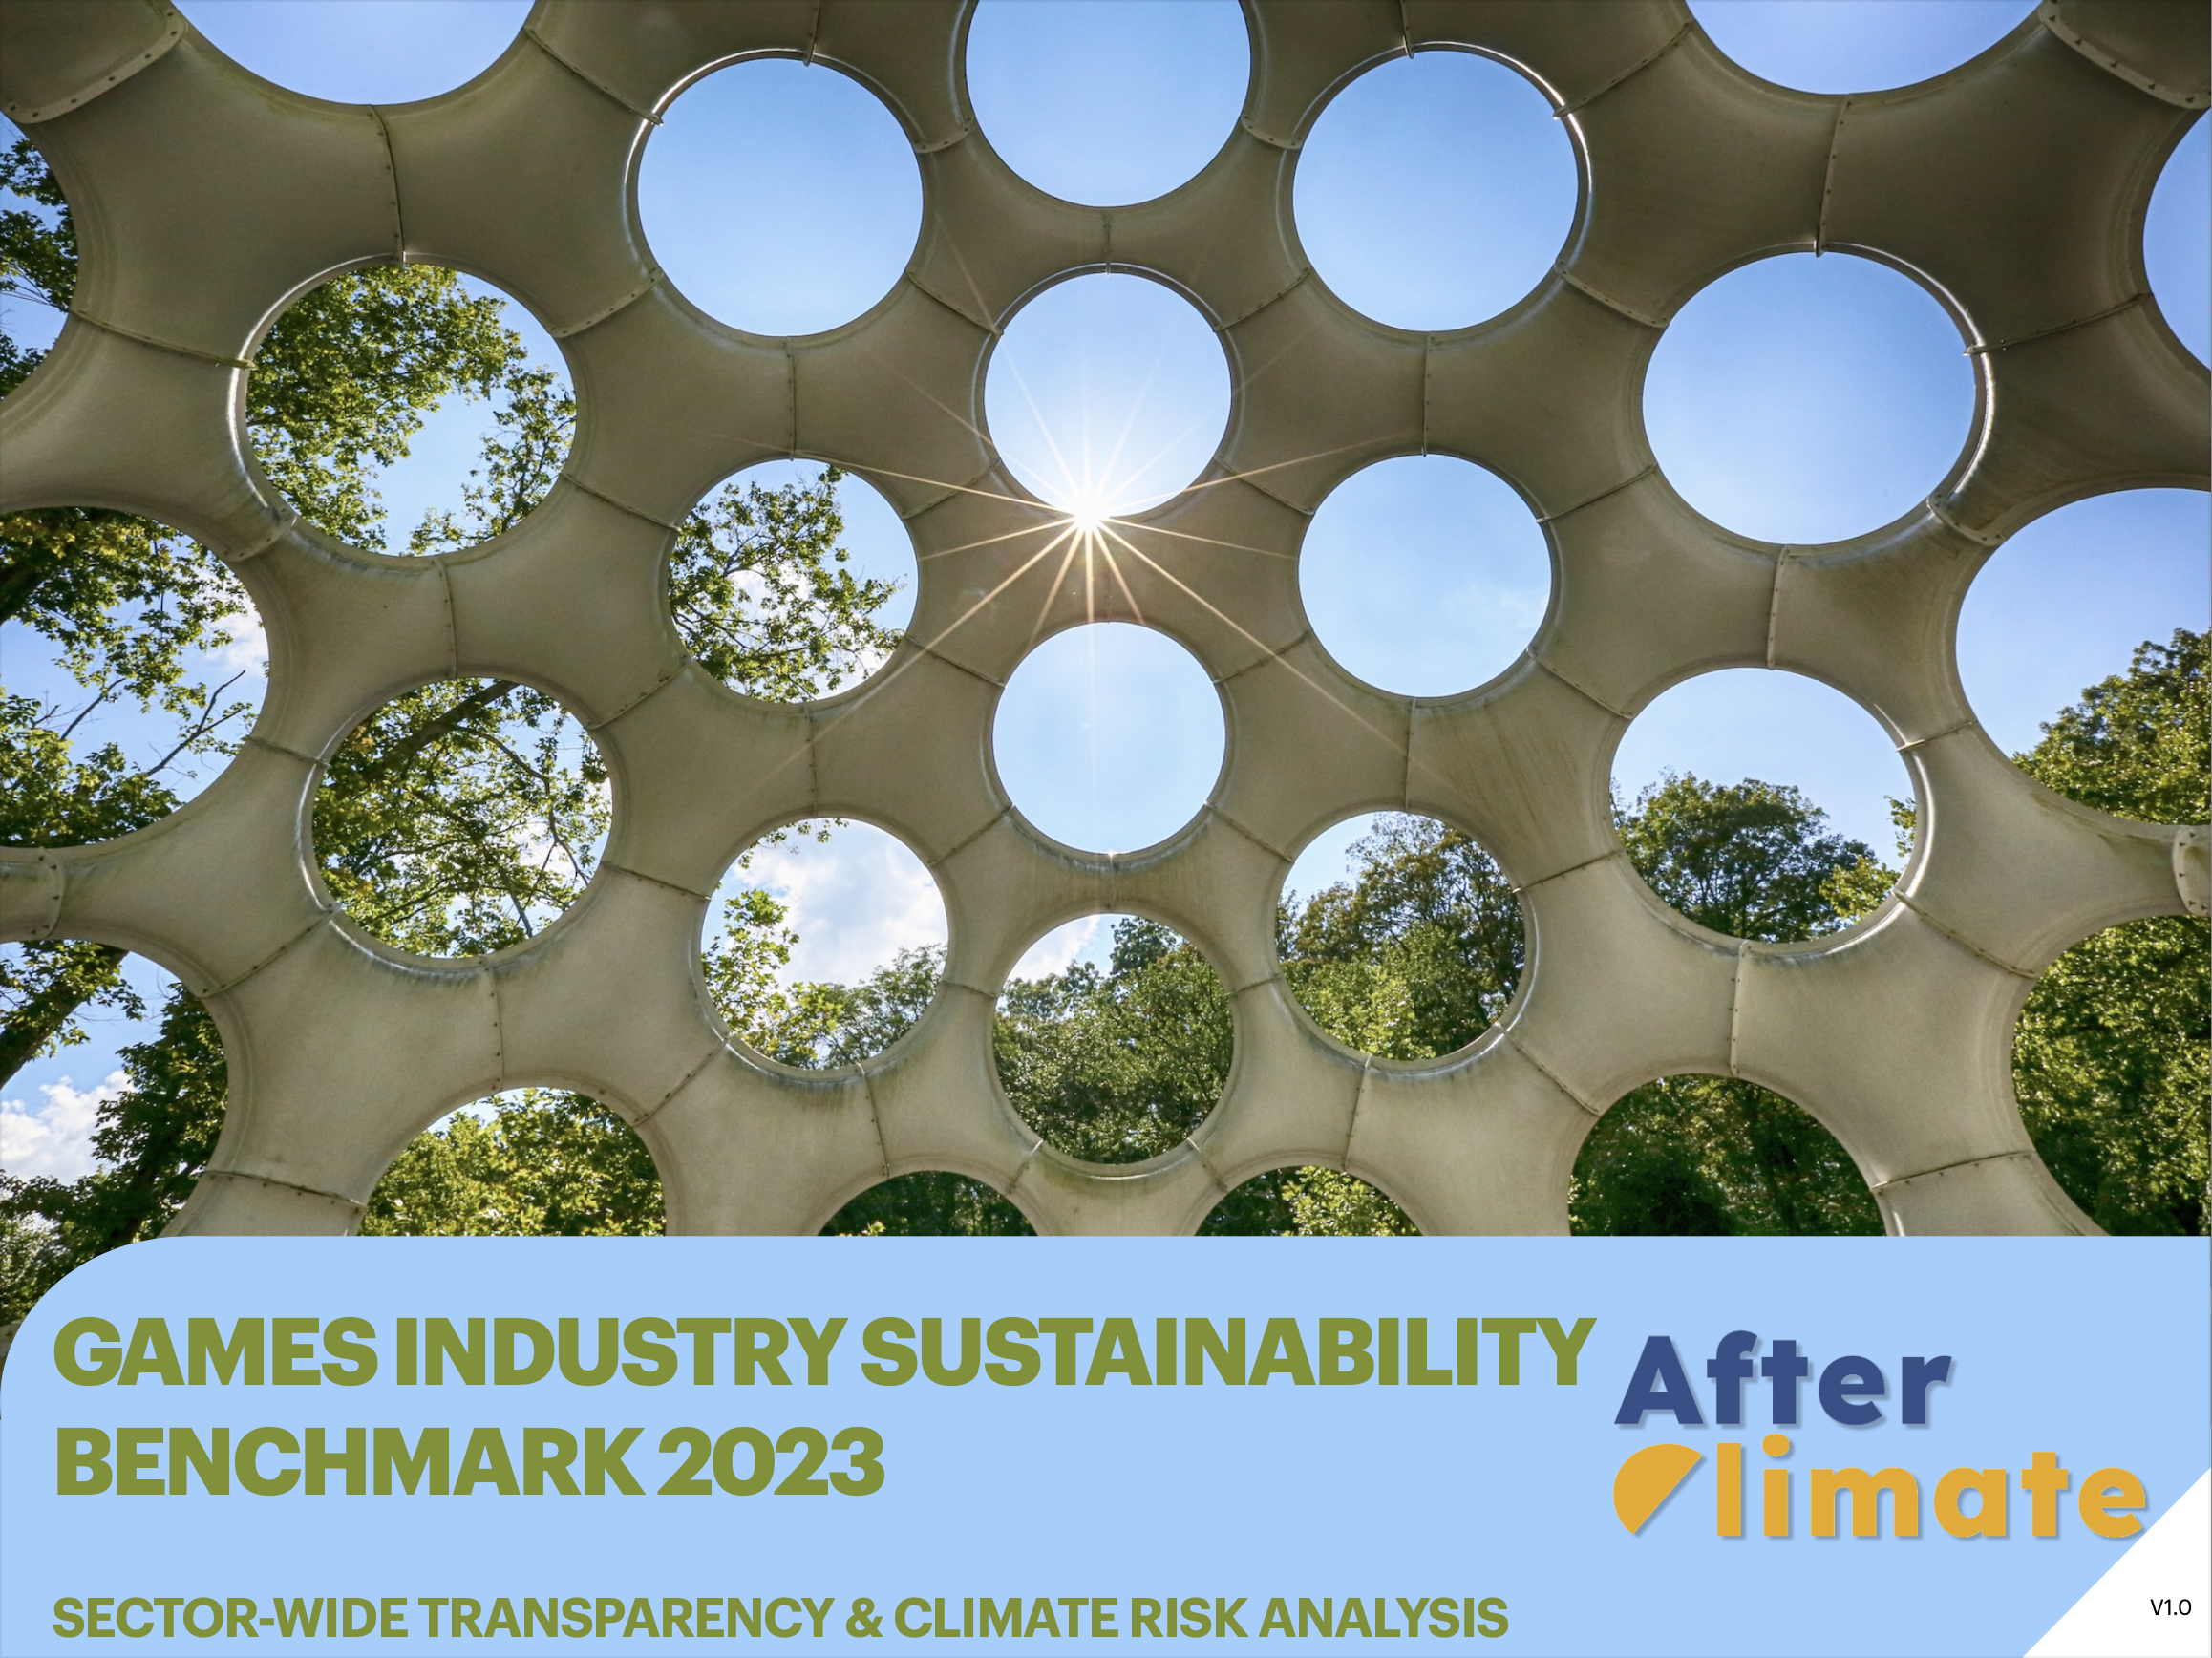 The front cover of the benchmark report – the sun shining through a building full of holes with trees behind